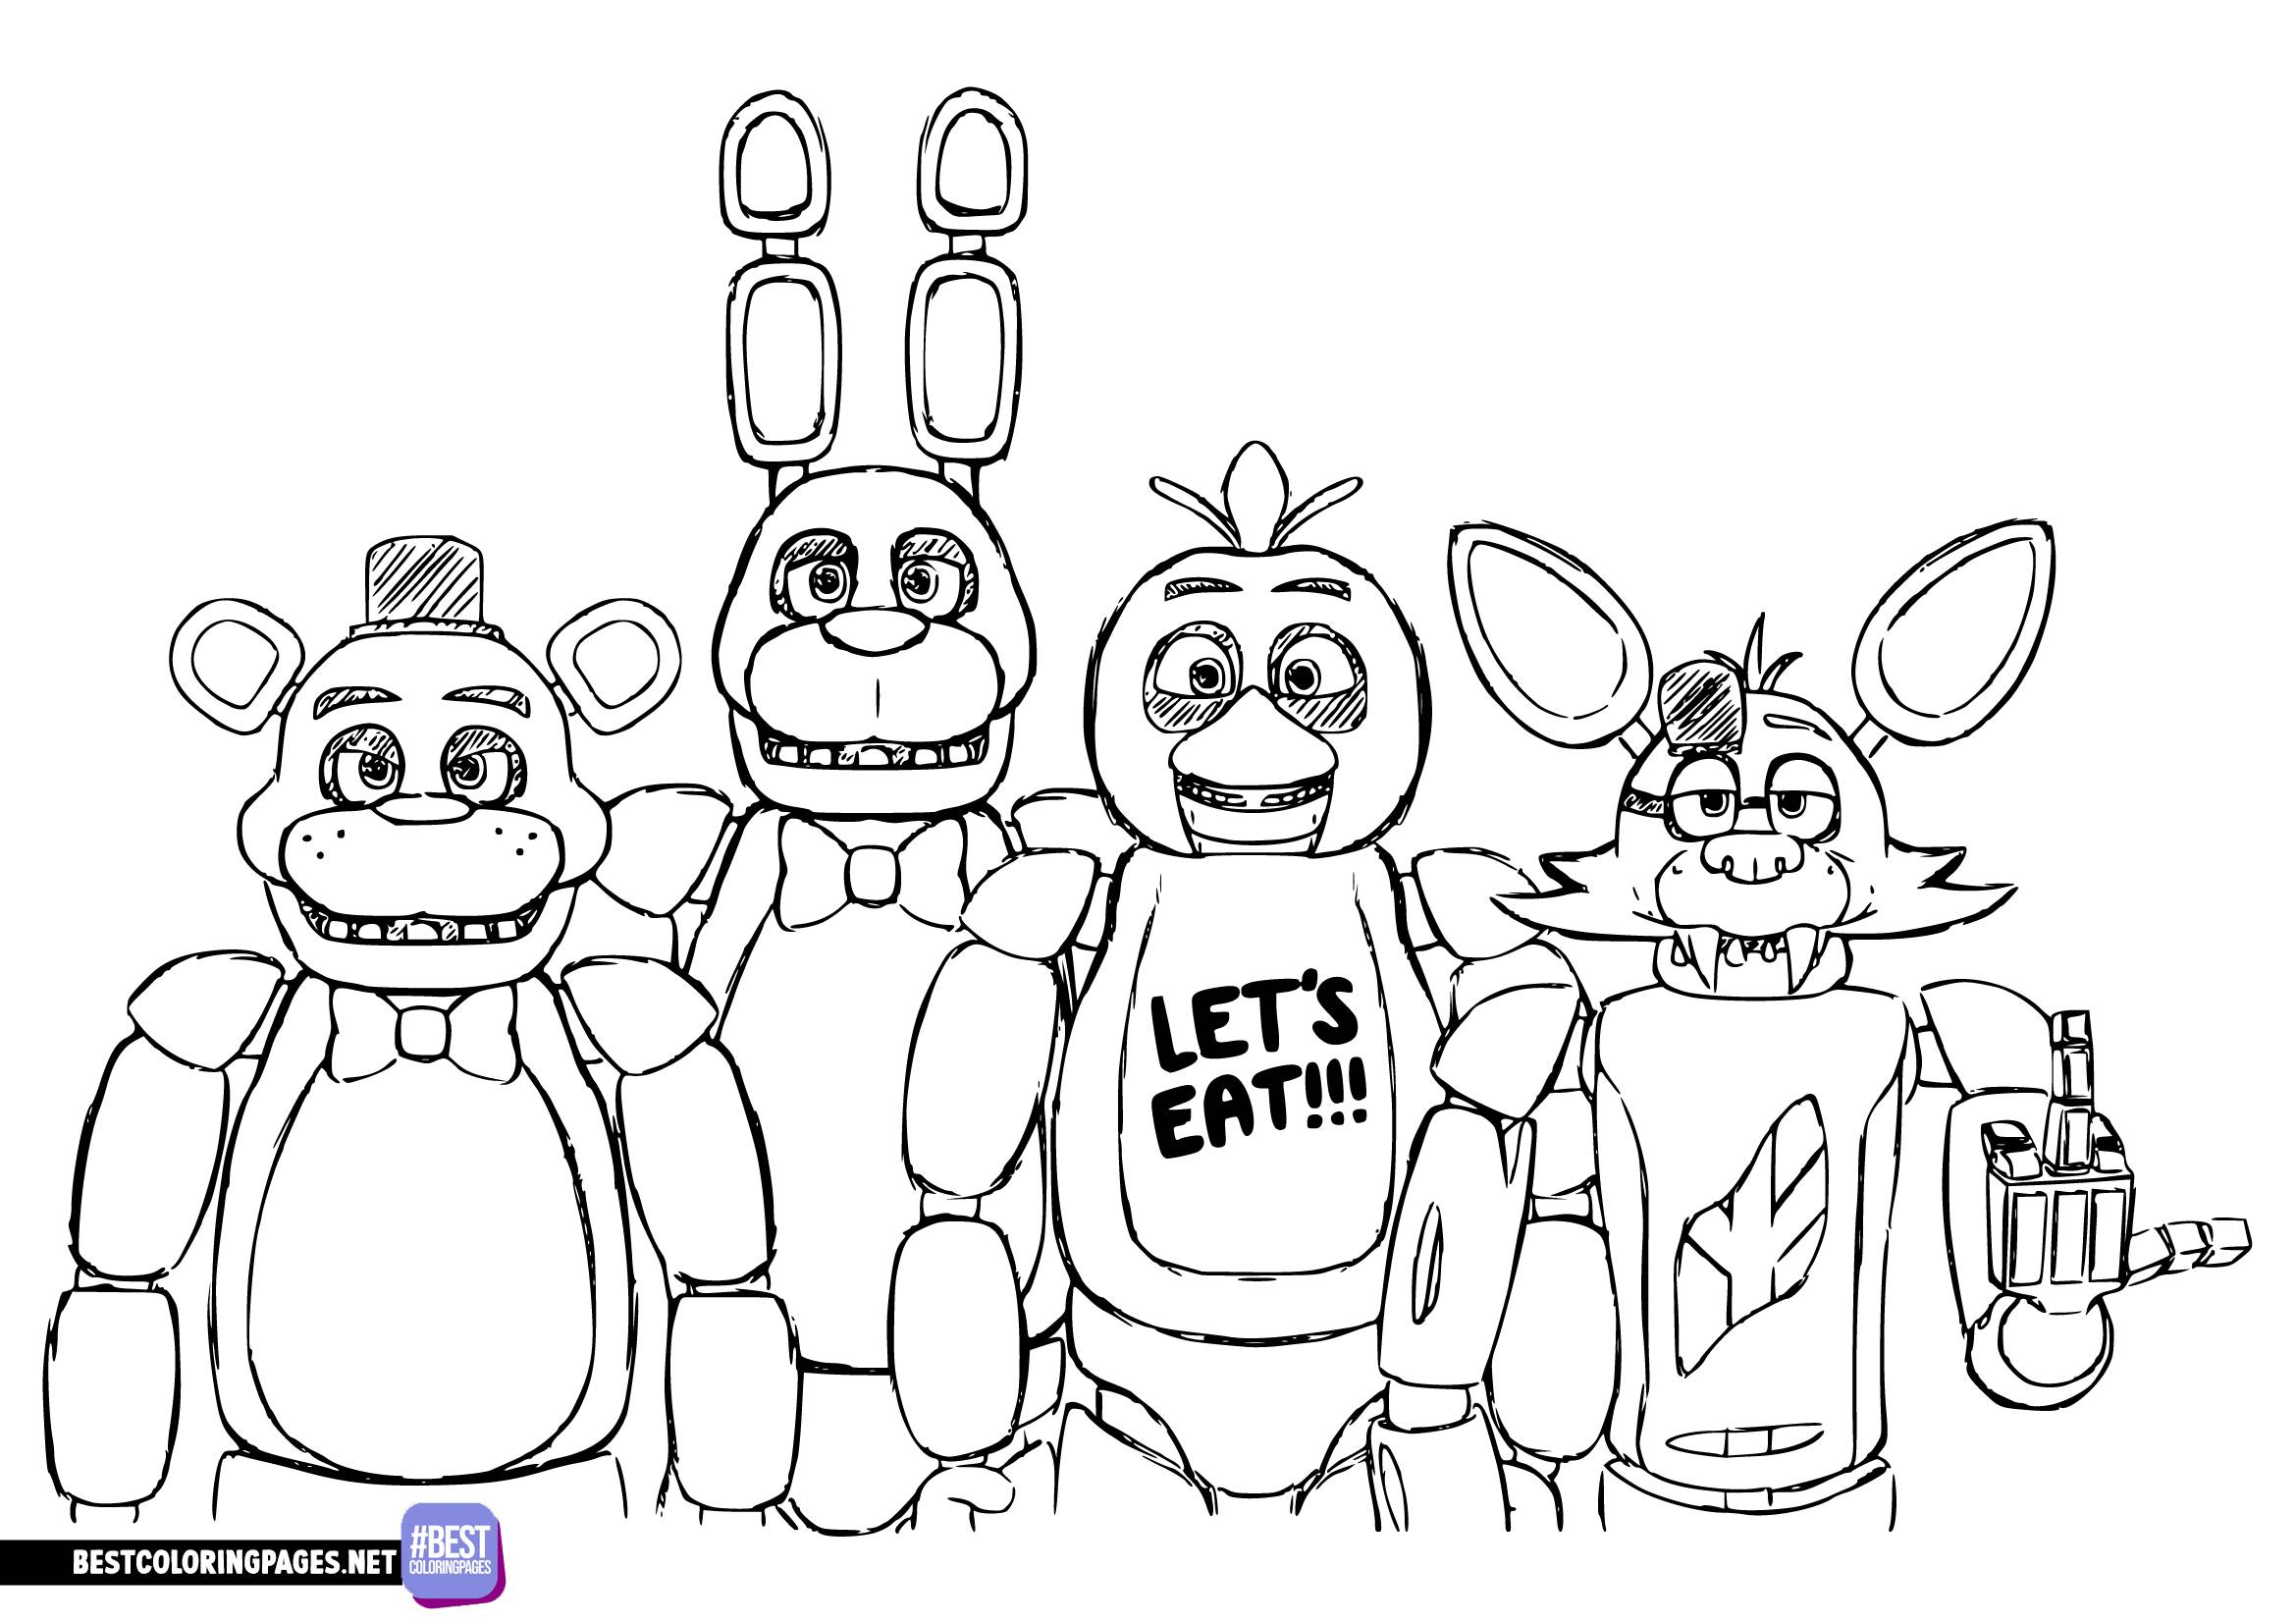 Free printable five nights at freddys coloring pages